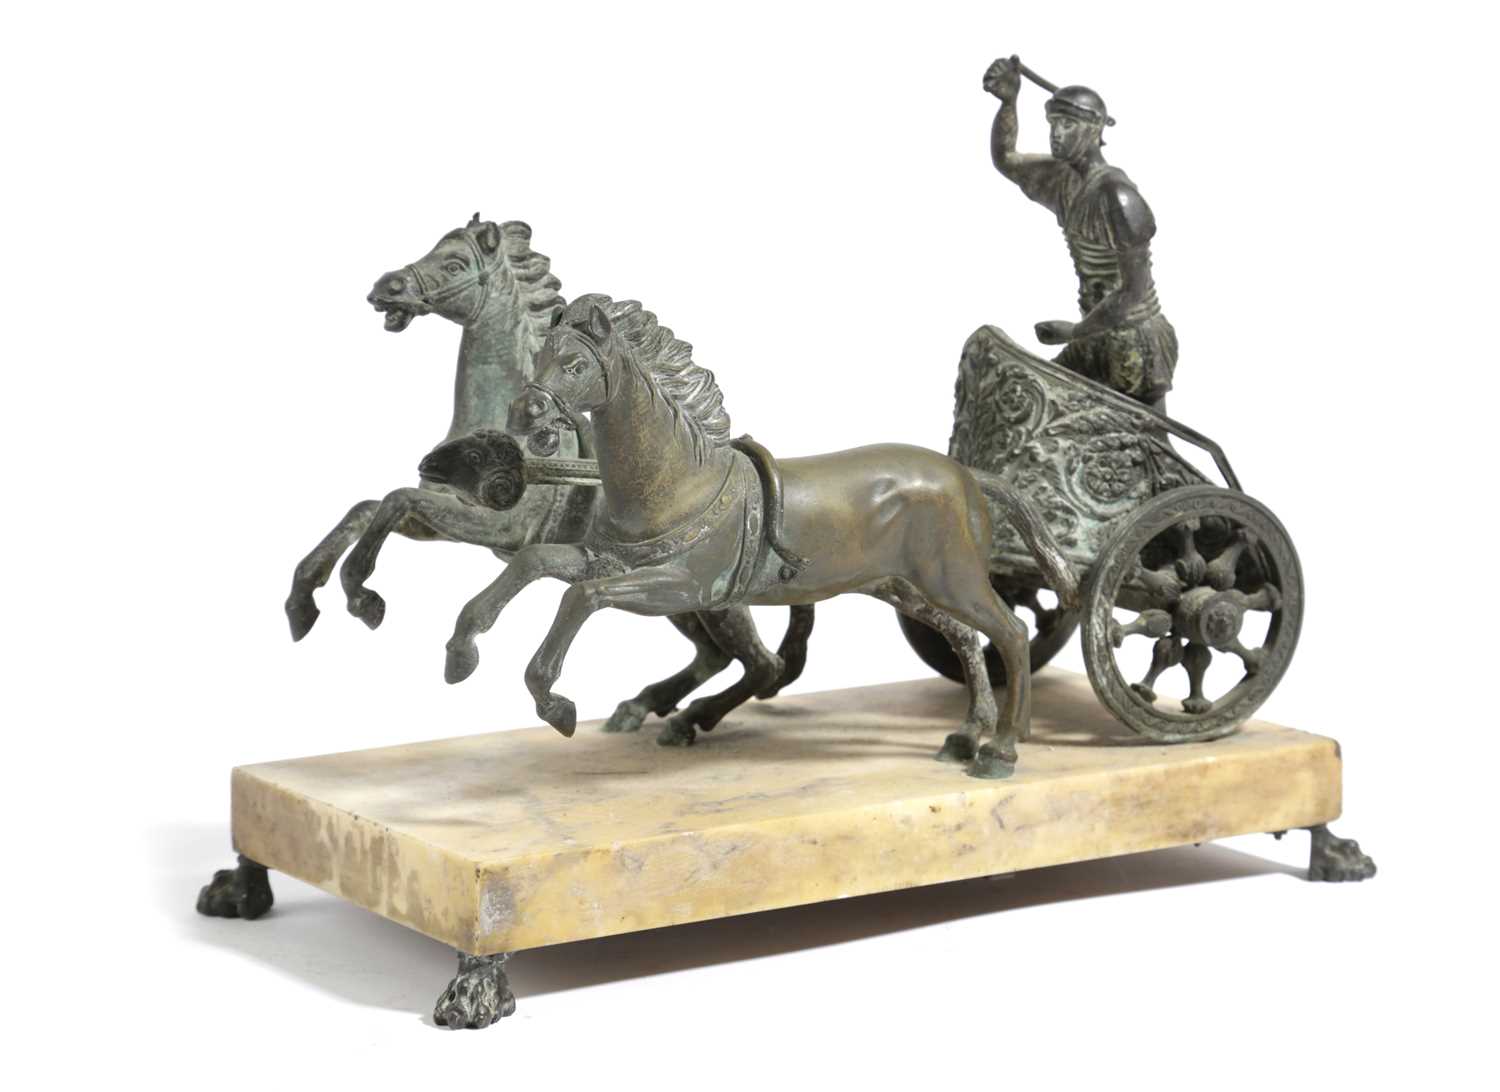 AN ITALIAN BRONZE GRAND TOUR CHARIOTEER GROUP AFTER THE ANTIQUE, 19TH CENTURY with two galloping